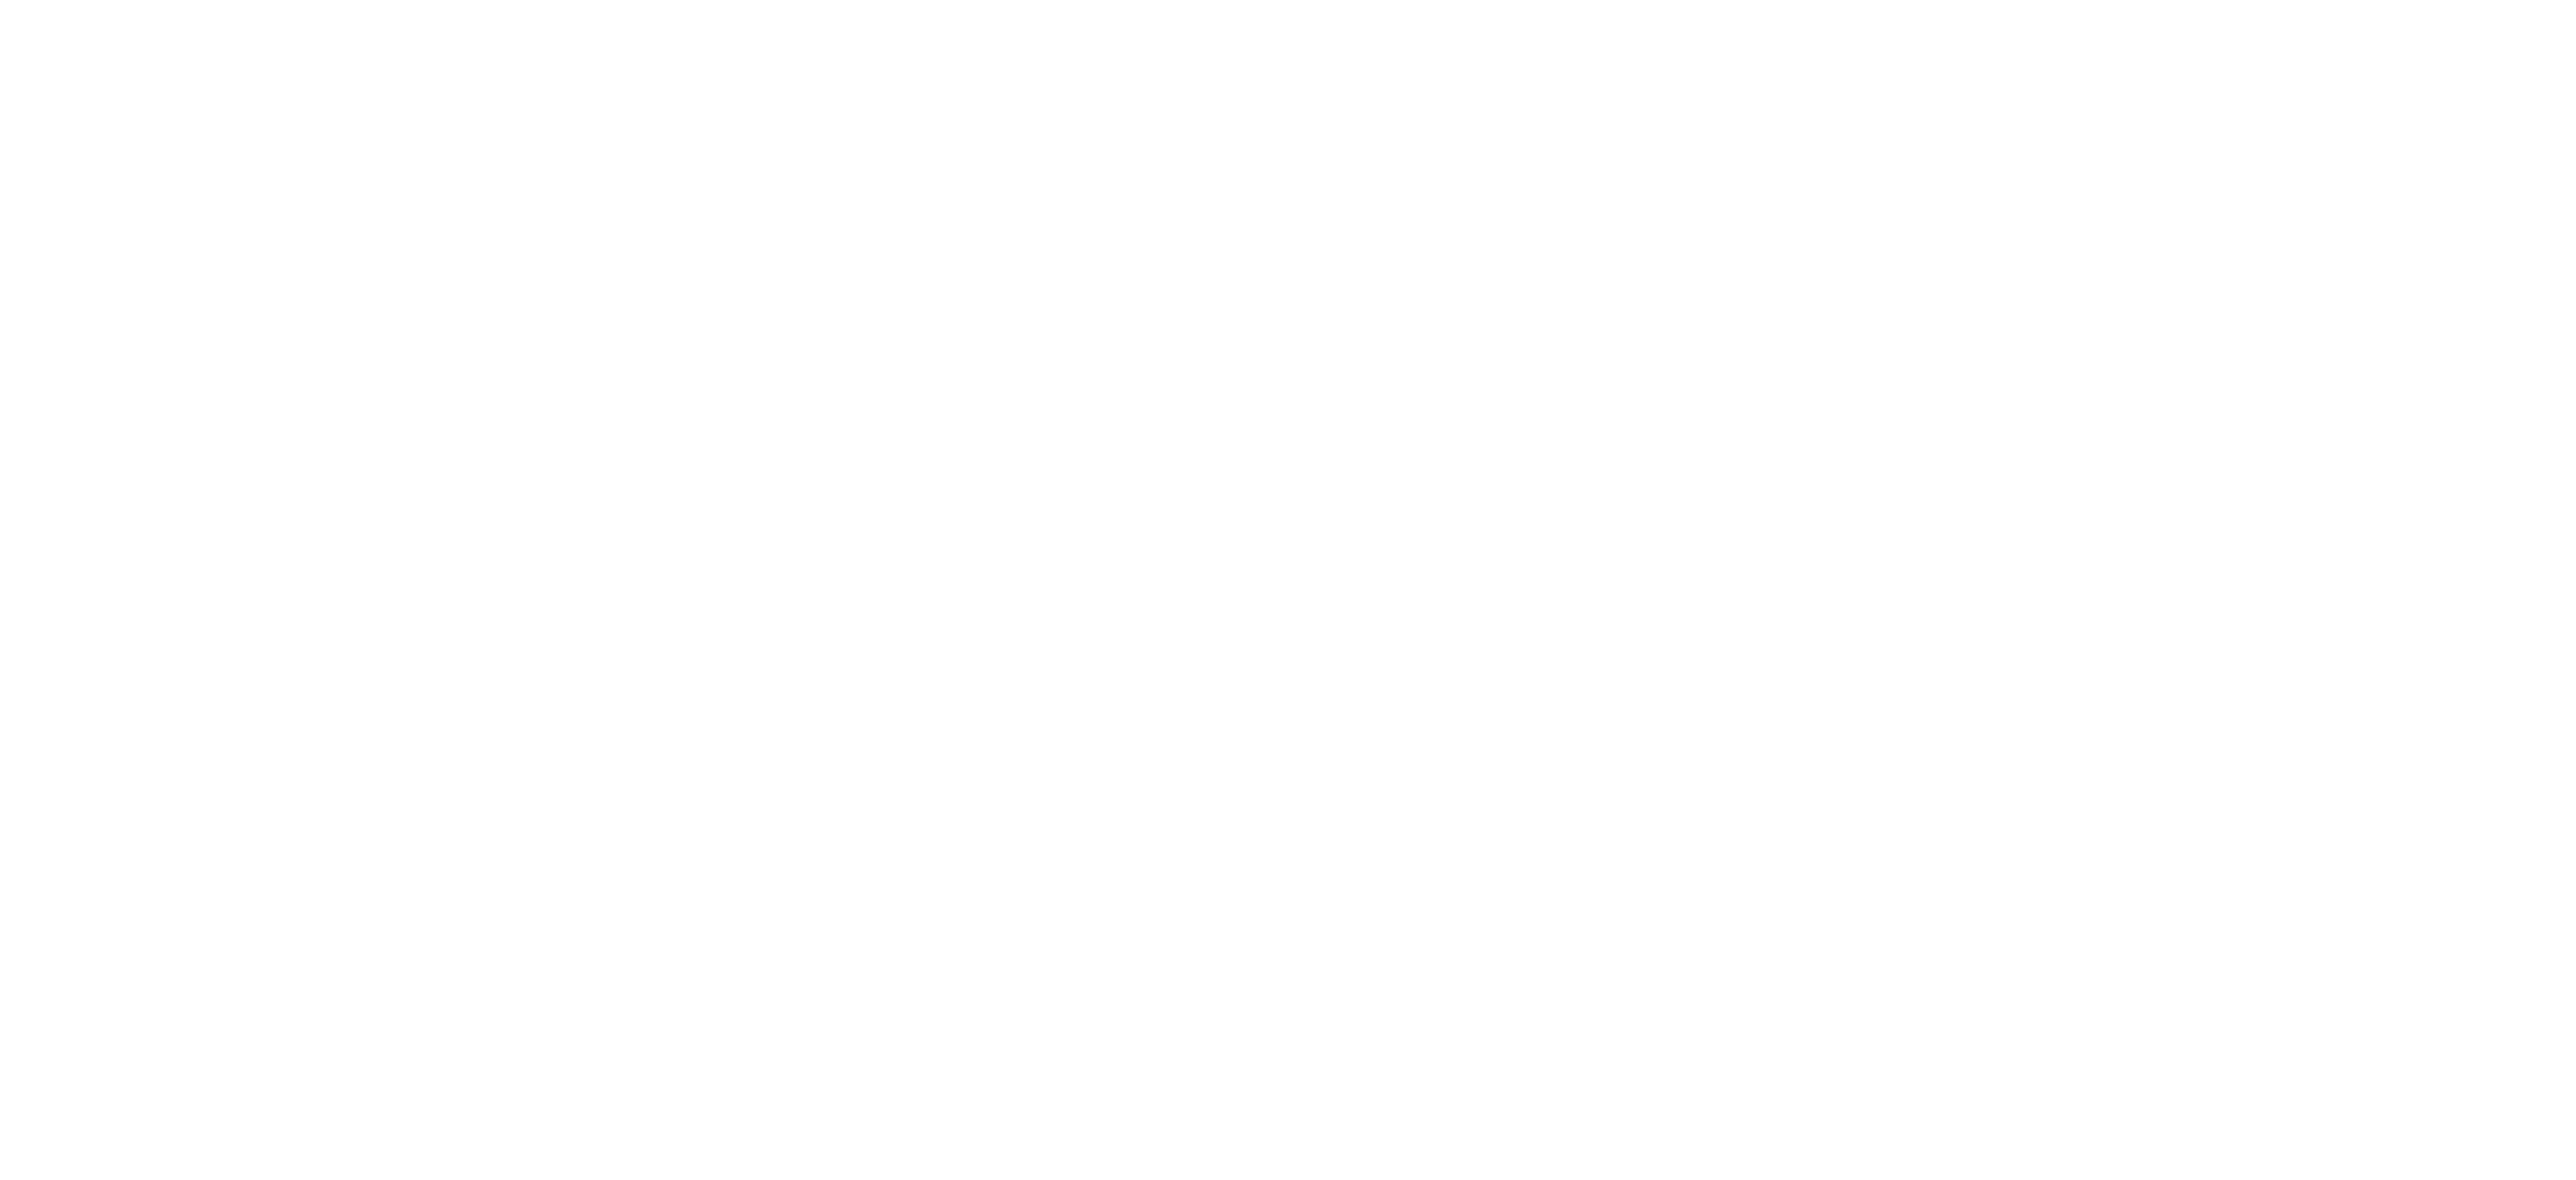 SouthWest Mobile County